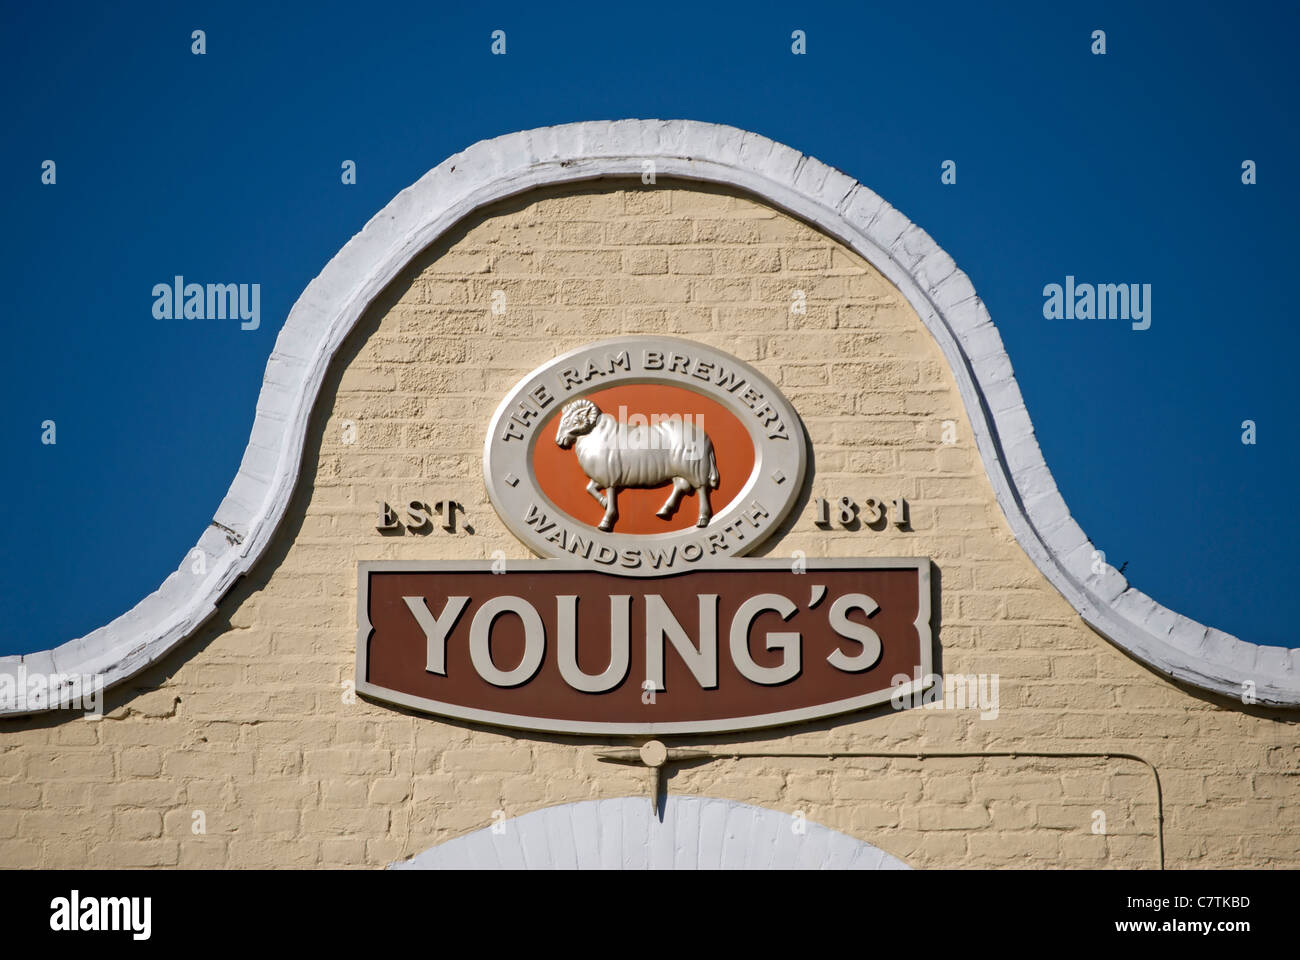 ram logo of young's brewery, forming part of the roofline of the marble hill pub, twickenham, middesex, england Stock Photo